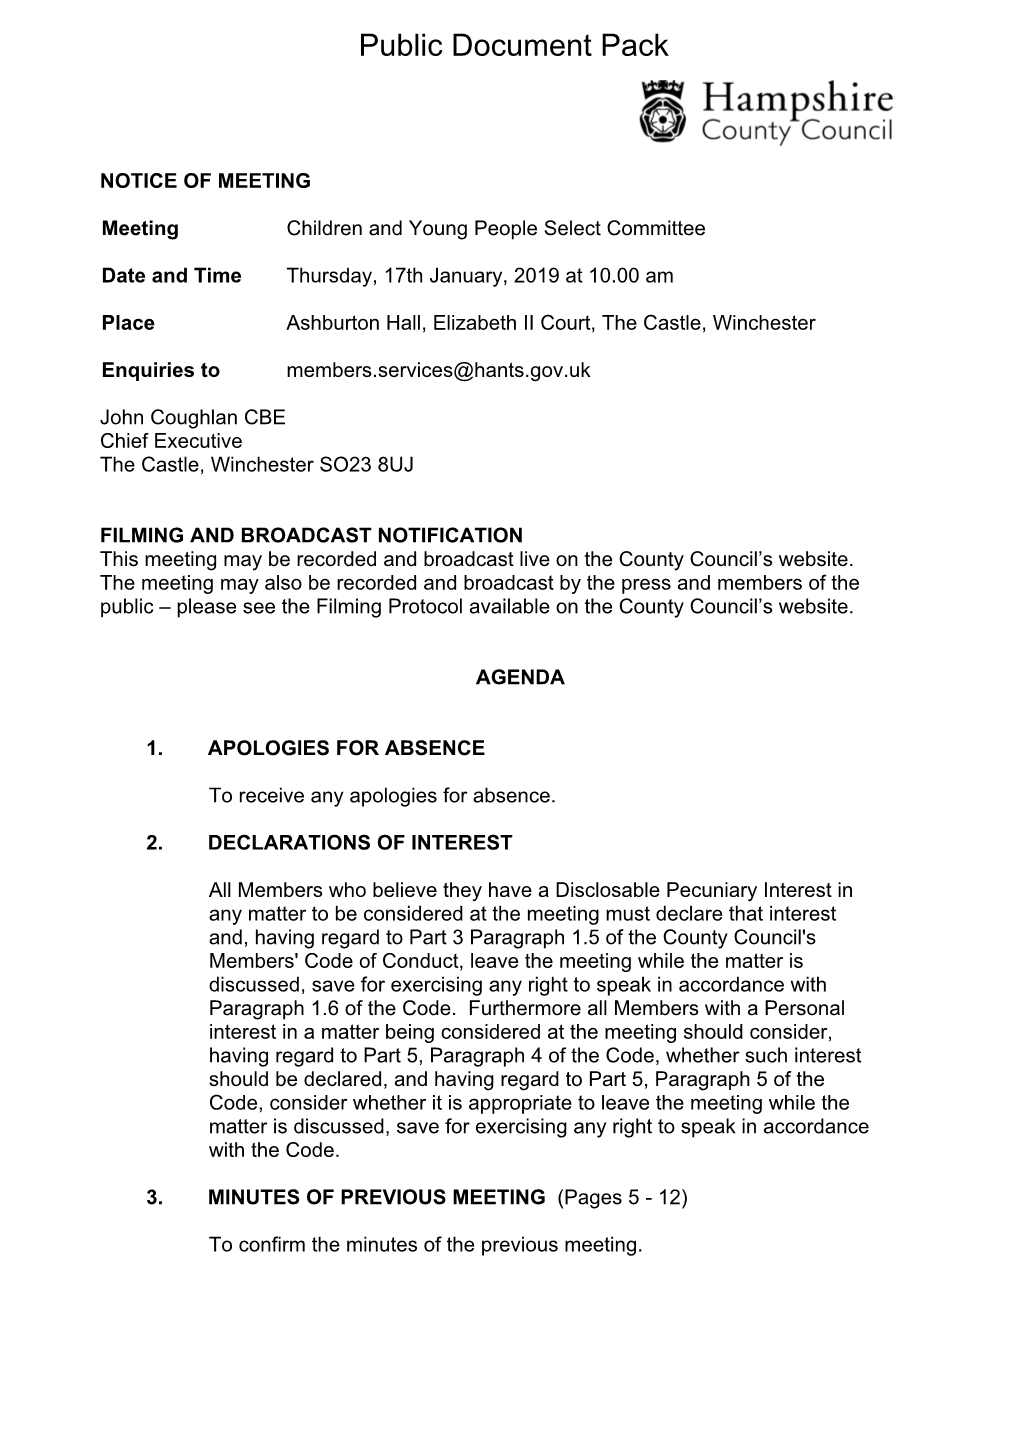 (Public Pack)Agenda Document for Children and Young People Select Committee, 17/01/2019 10:00